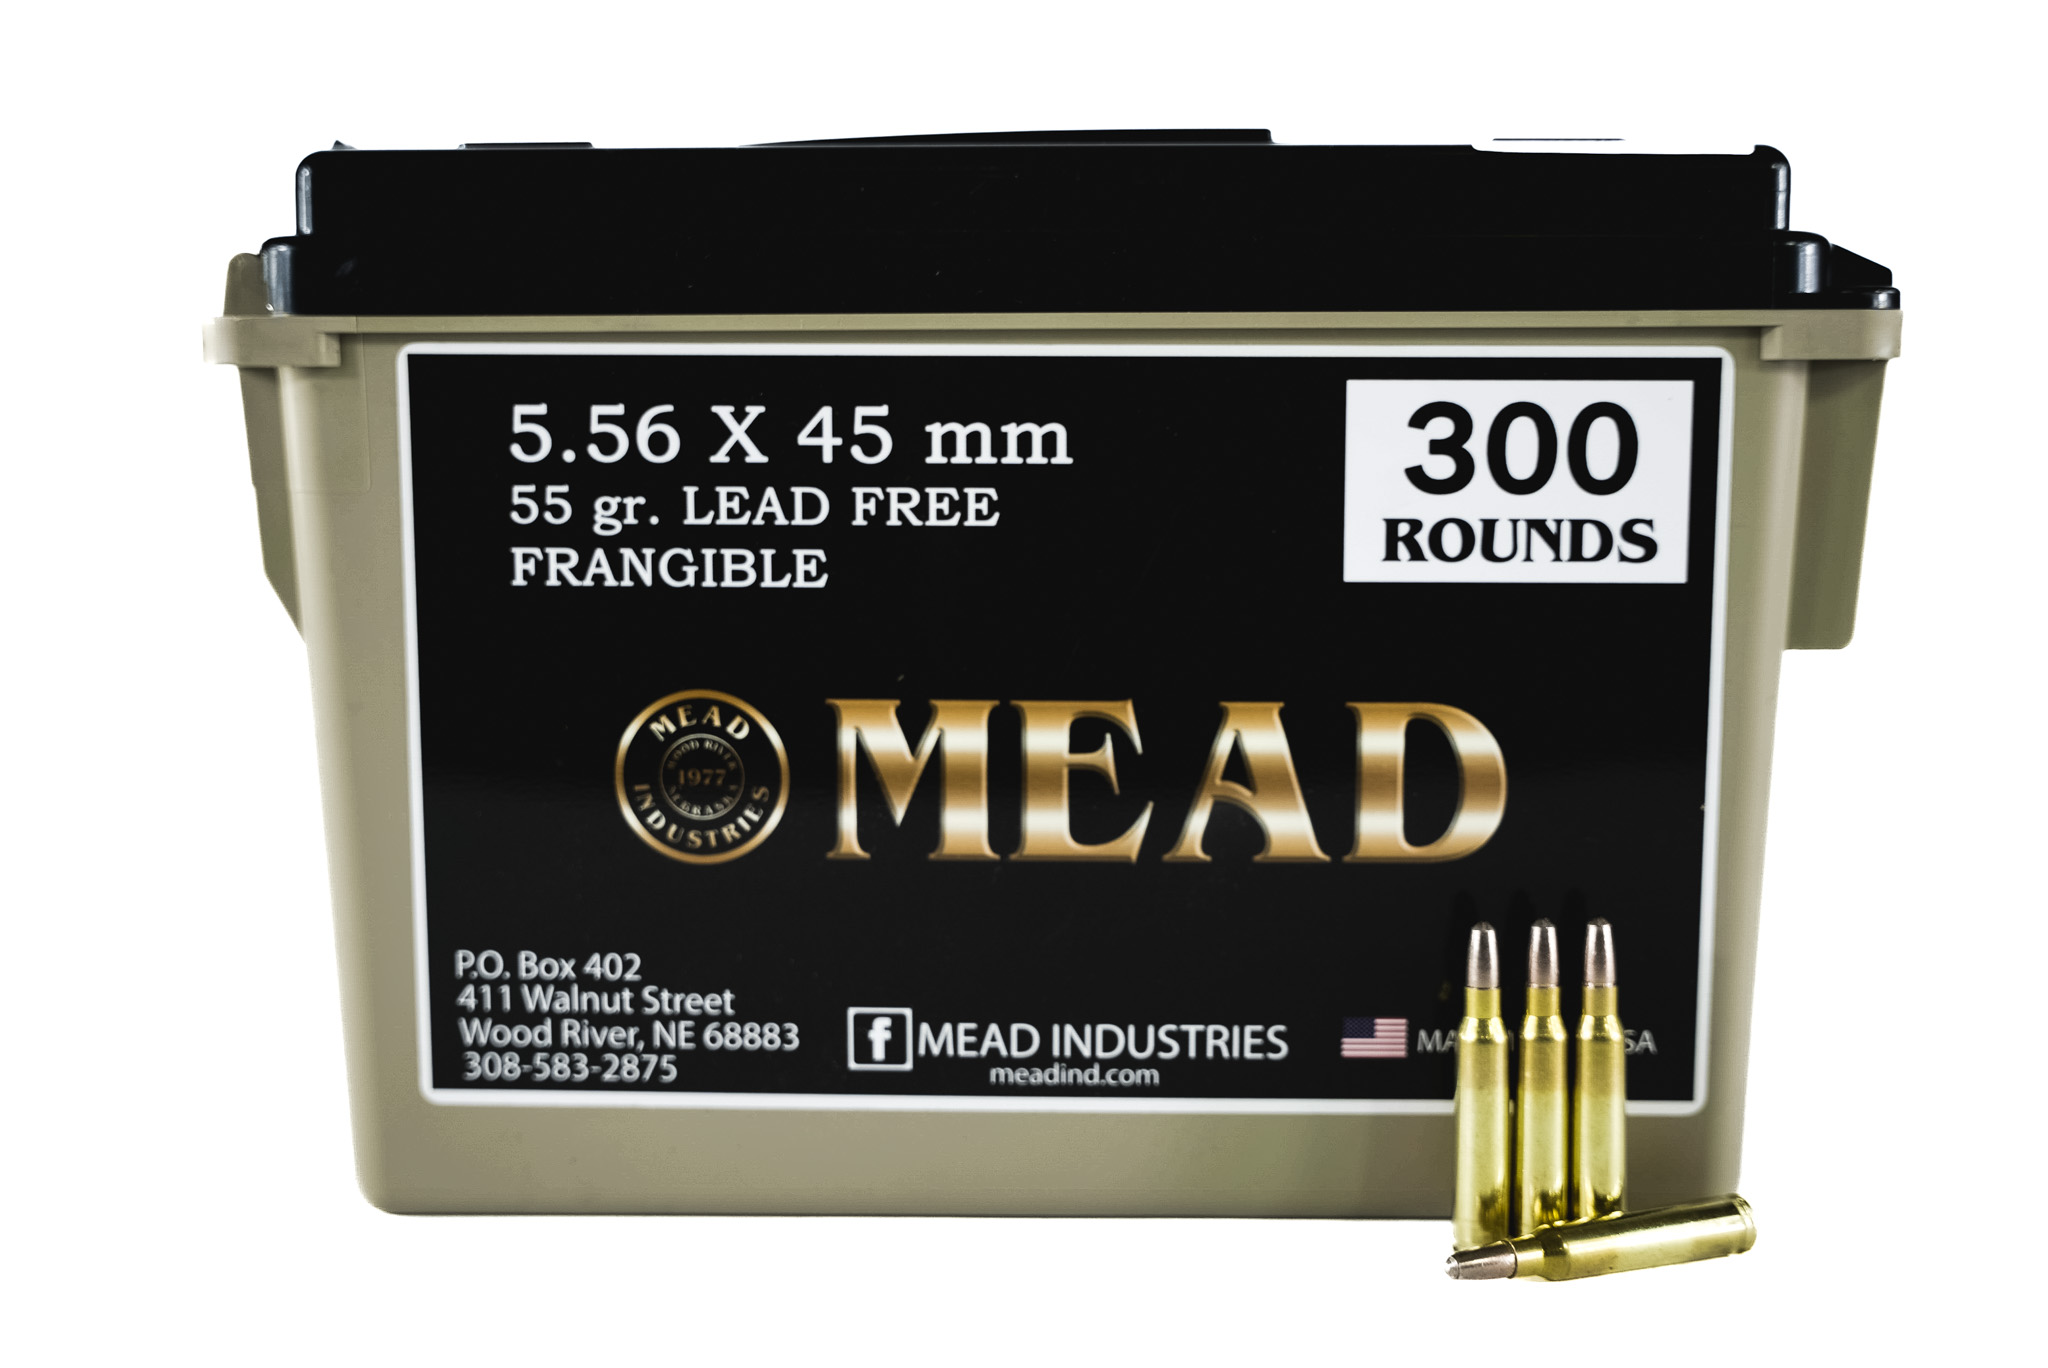 5.56 X 45mm 55gr Lead-Free Frangible Ammunition!! NEW Brass, 300 Rounds!